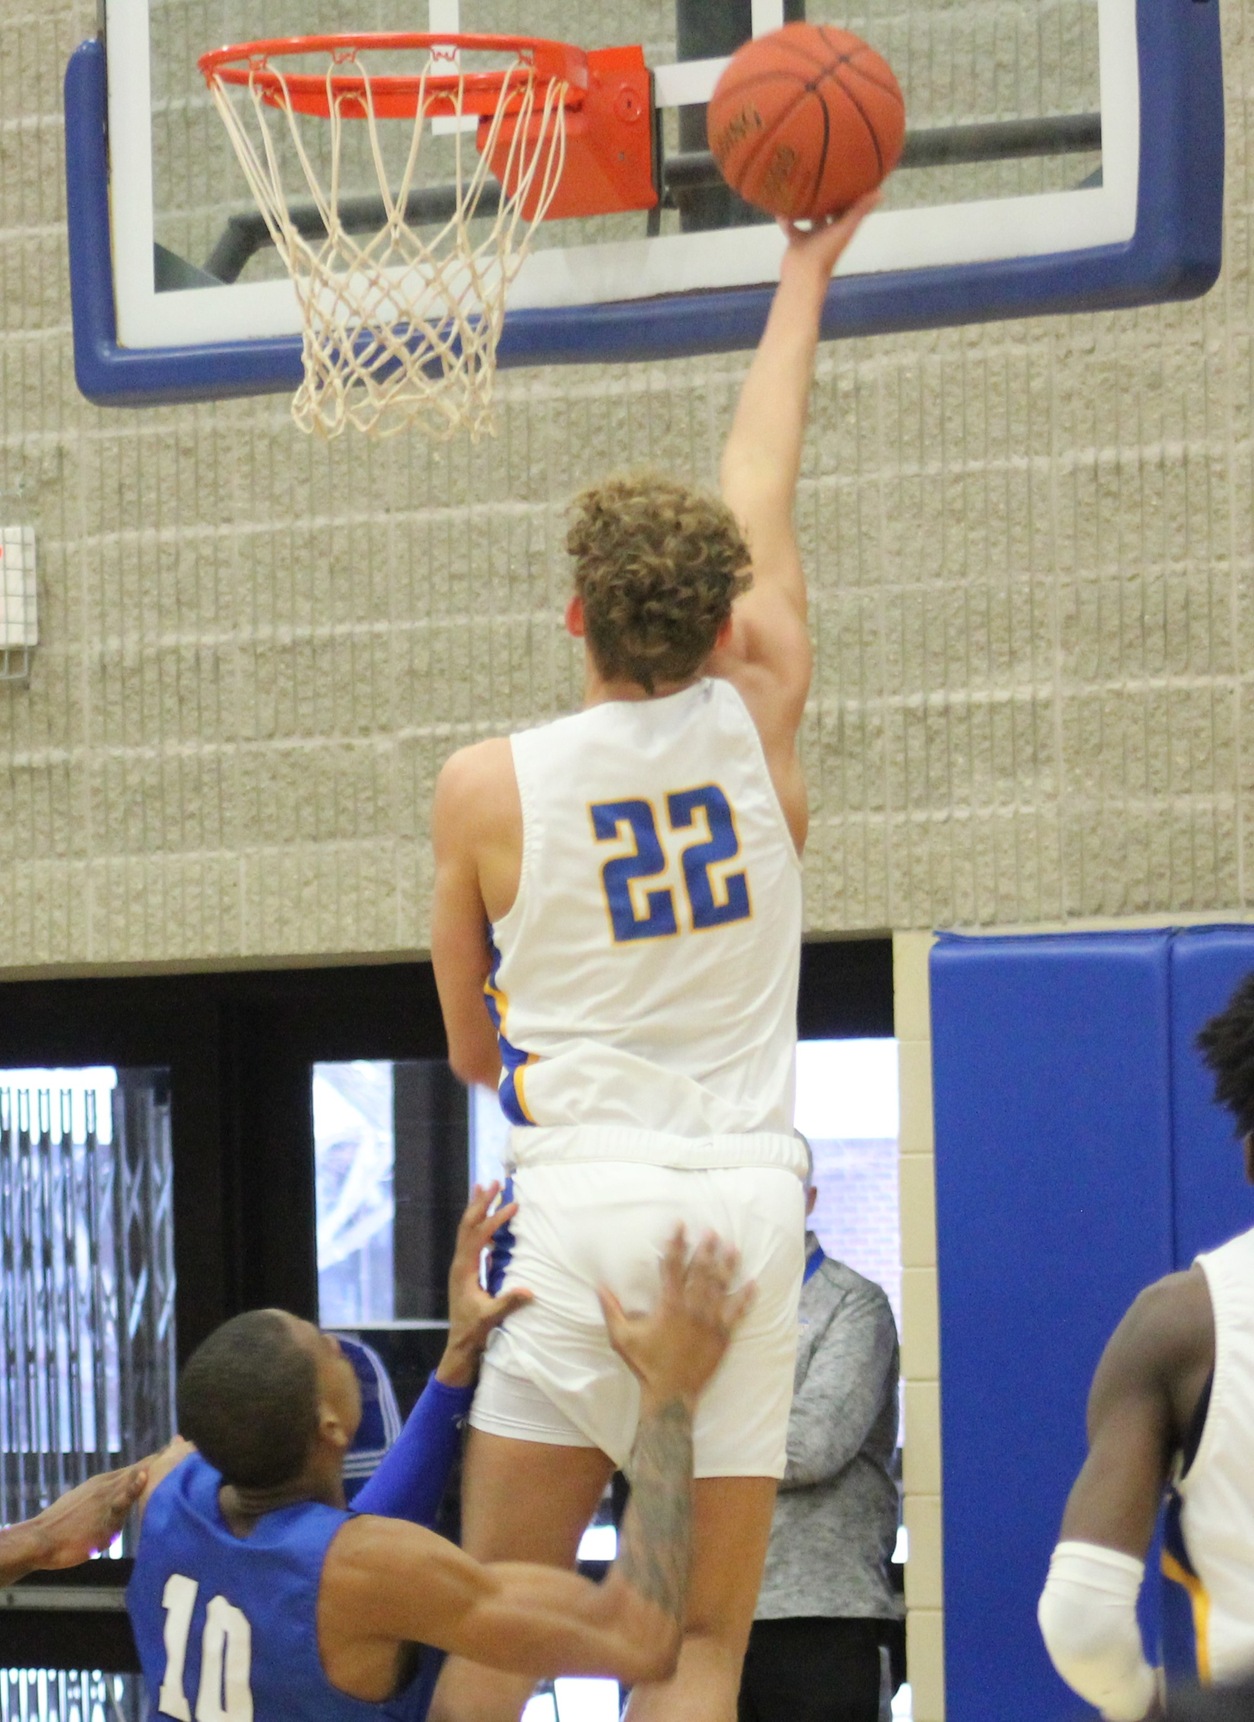 NIACC's Chandler Dean converts a layup in the first half of Saturday's game against DMACC.